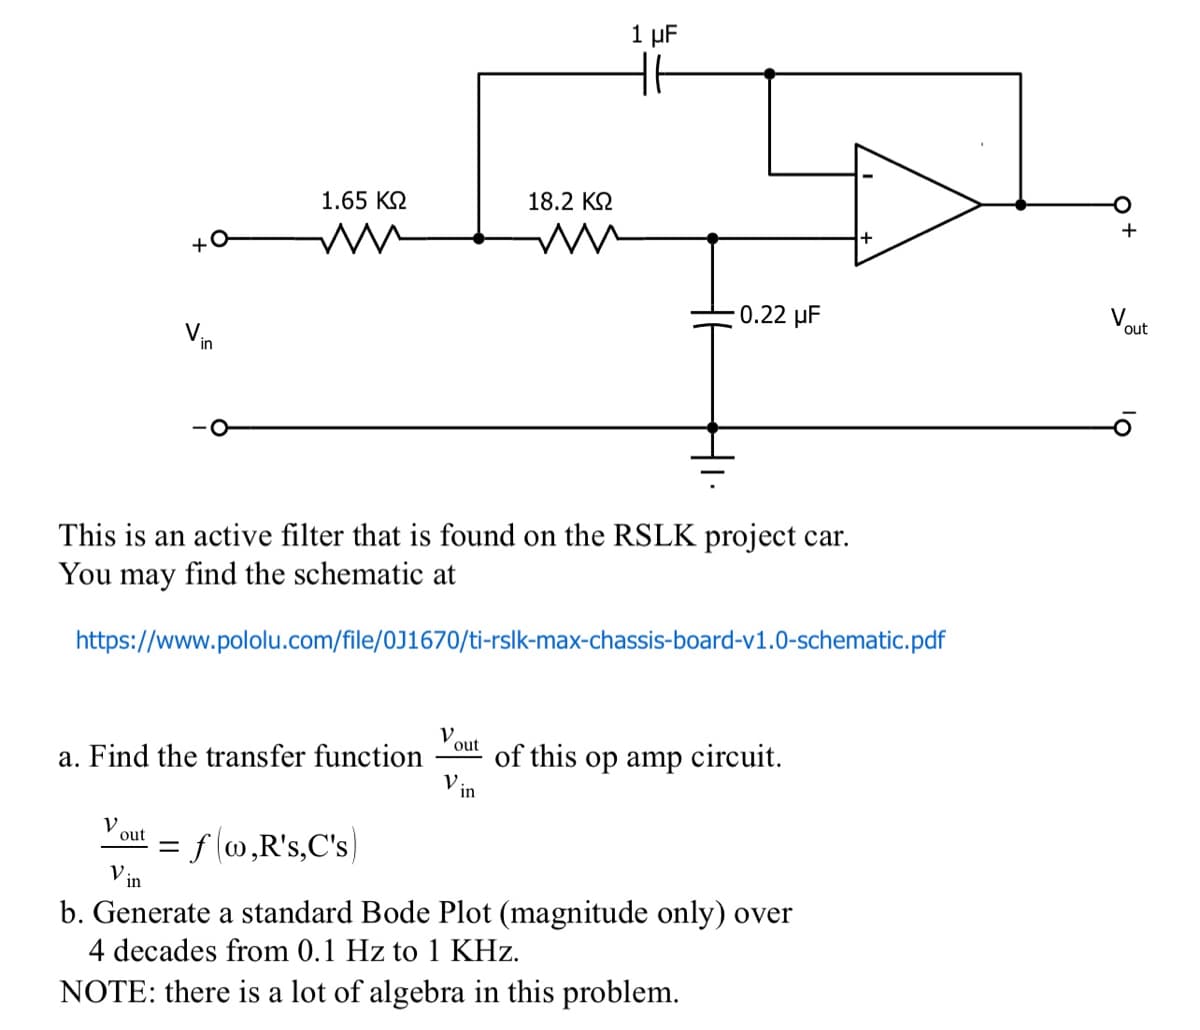 +0
in
V
1.65 ΚΩ
out
a. Find the transfer function
This is an active filter that is found on the RSLK project car.
You may find the schematic at
https://www.pololu.com/file/0J1670/ti-rslk-max-chassis-board-v1.0-schematic.pdf
= f(w,R's,C's)
V.
out
18.2 ΚΩ
V:
1 μF
in
0.22 μF
of this op amp circuit.
+
V:.
b. Generate a standard Bode Plot (magnitude only) over
4 decades from 0.1 Hz to 1 KHz.
NOTE: there is a lot of algebra in this problem.
V
out